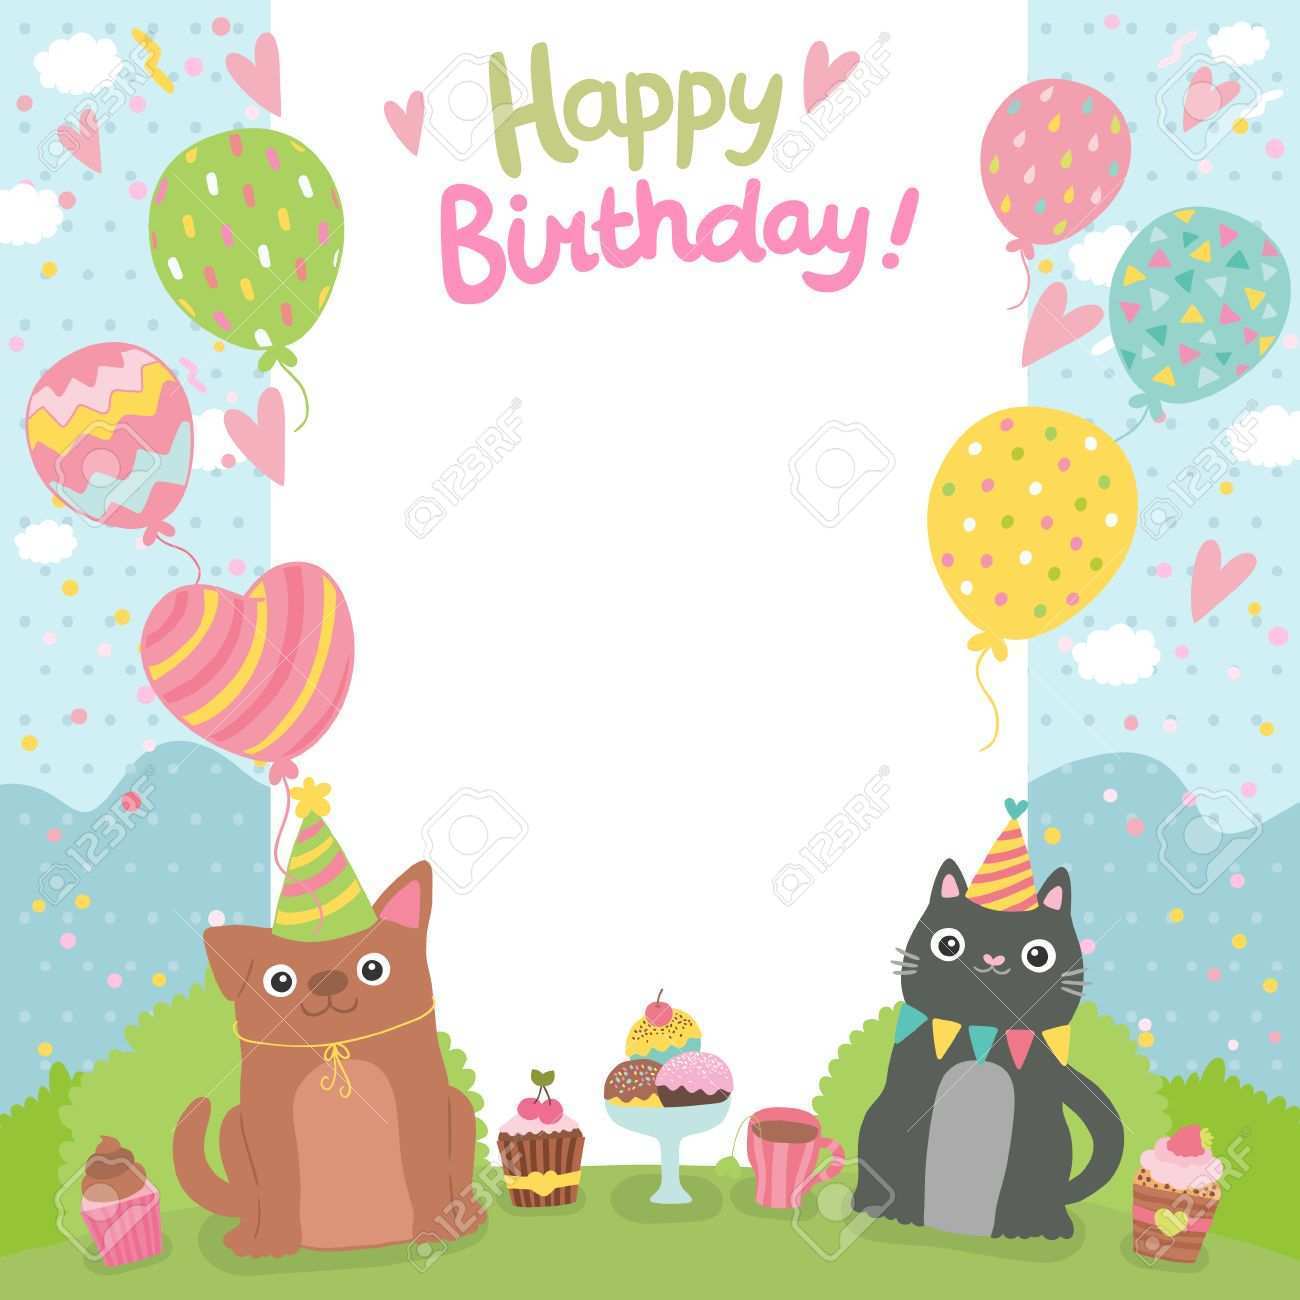 48 The Best Birthday Card Template Cat Layouts by Birthday Card Template Cat